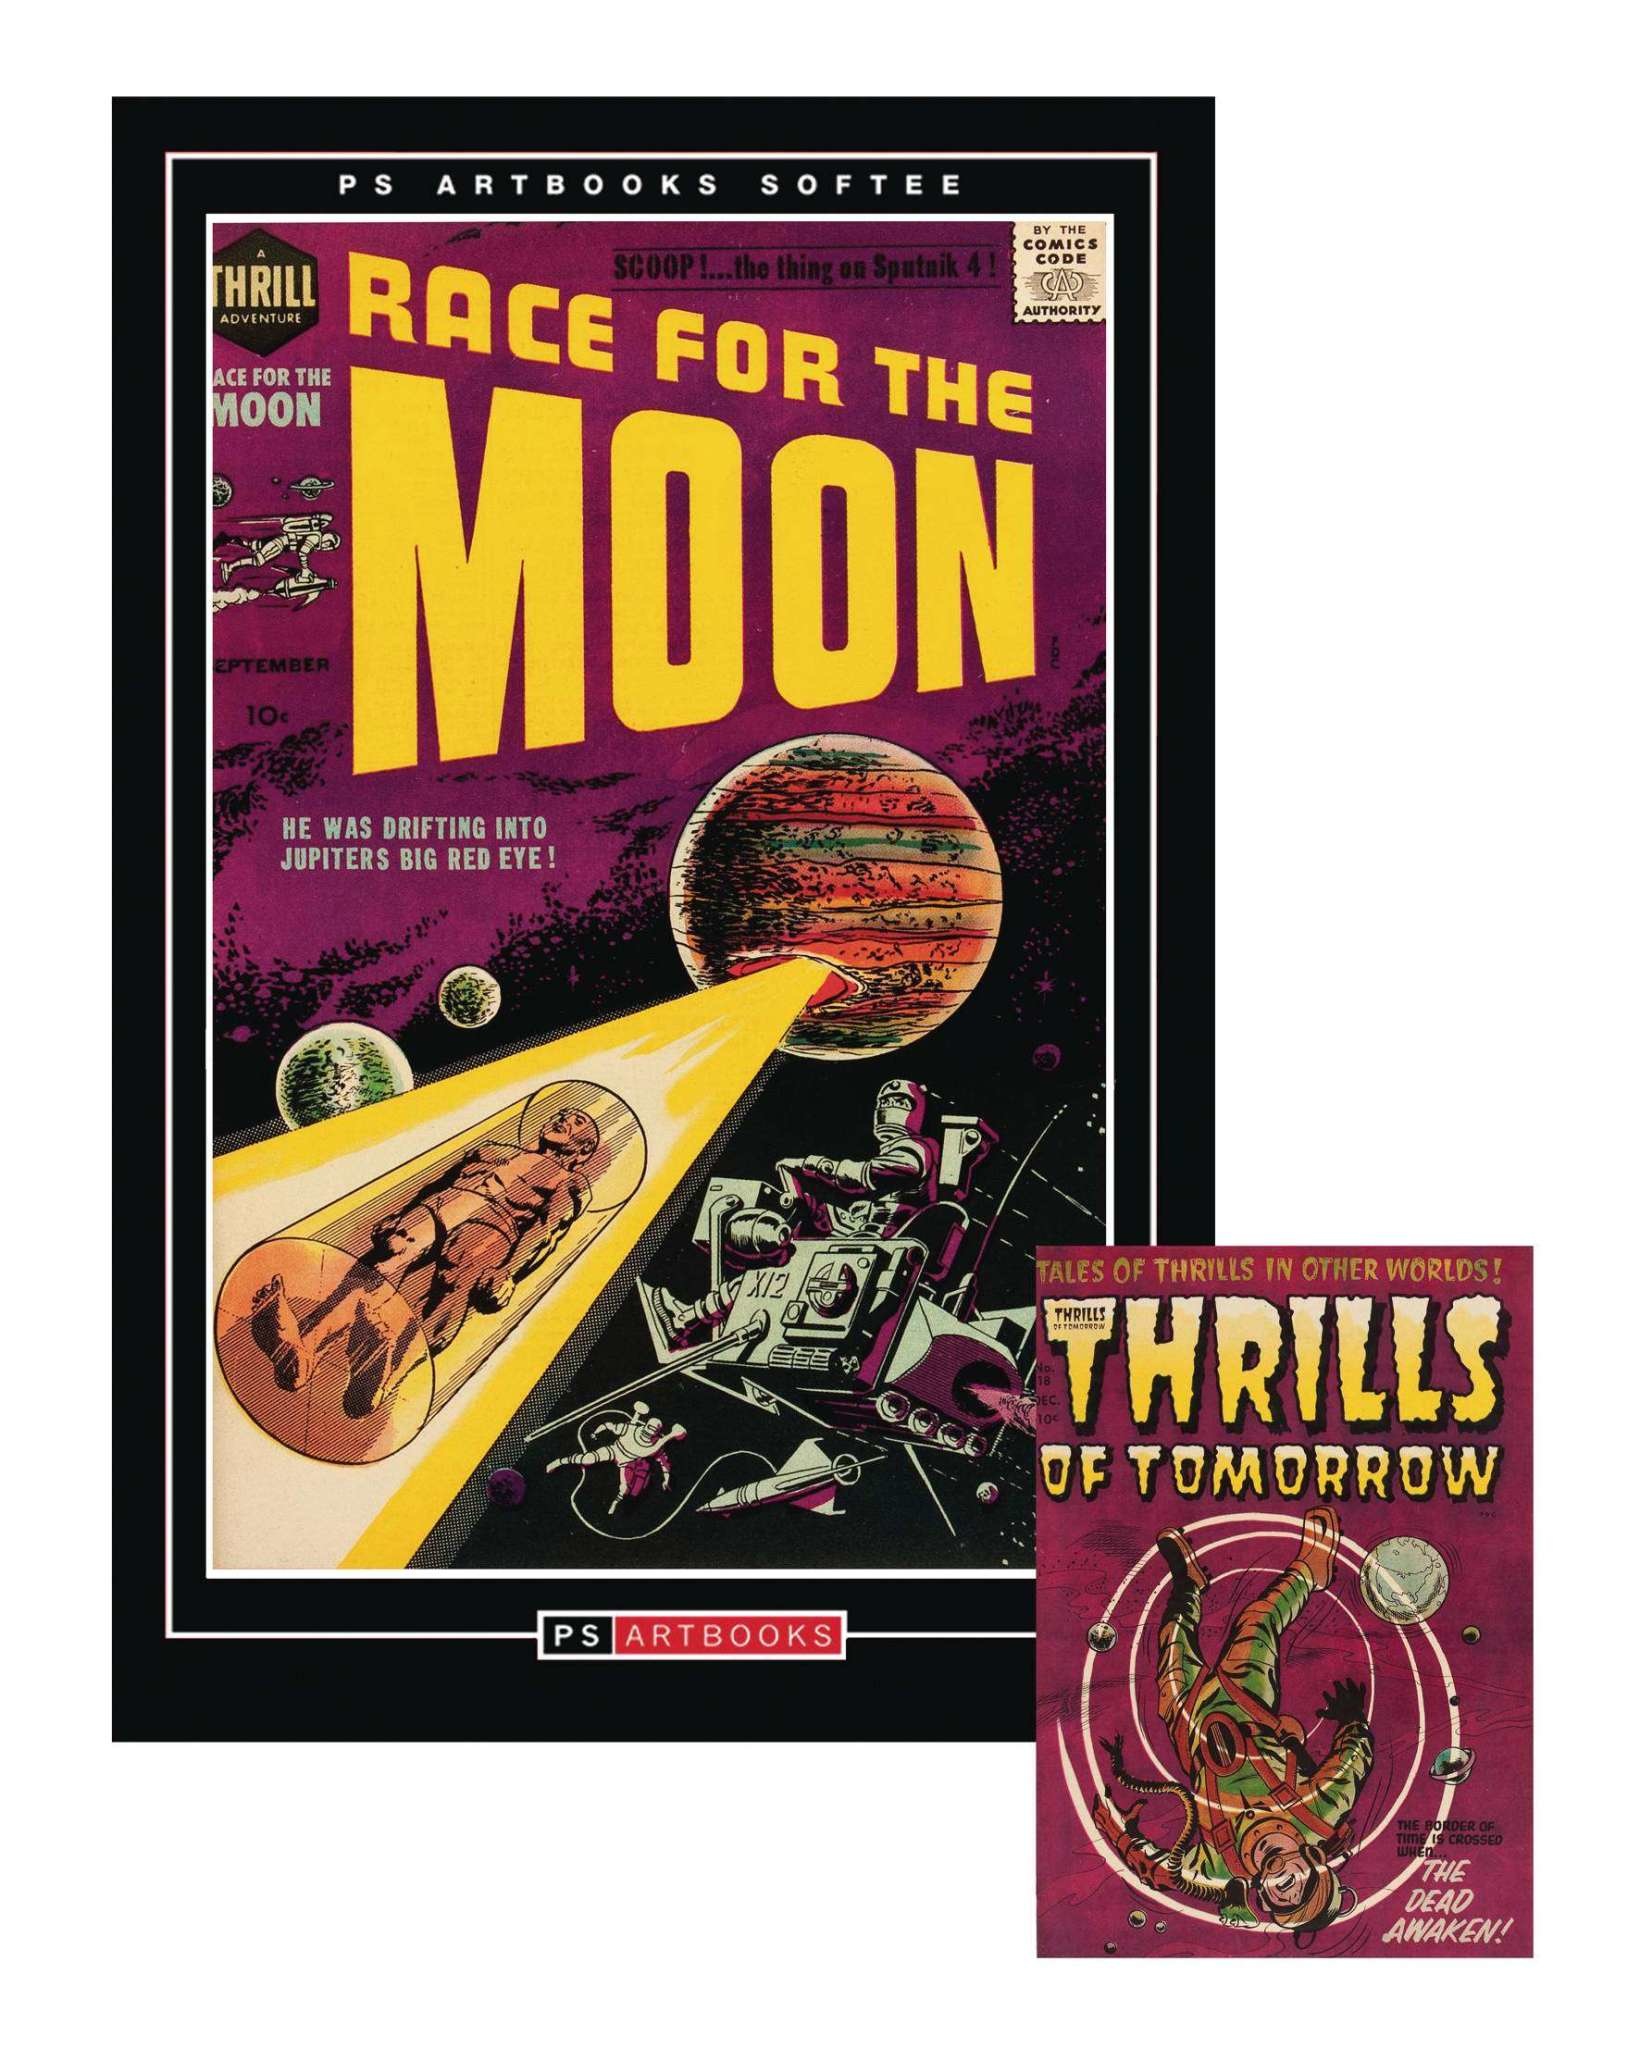 PS Artbooks Race For Moon Thrills Of Tomorrow Softee